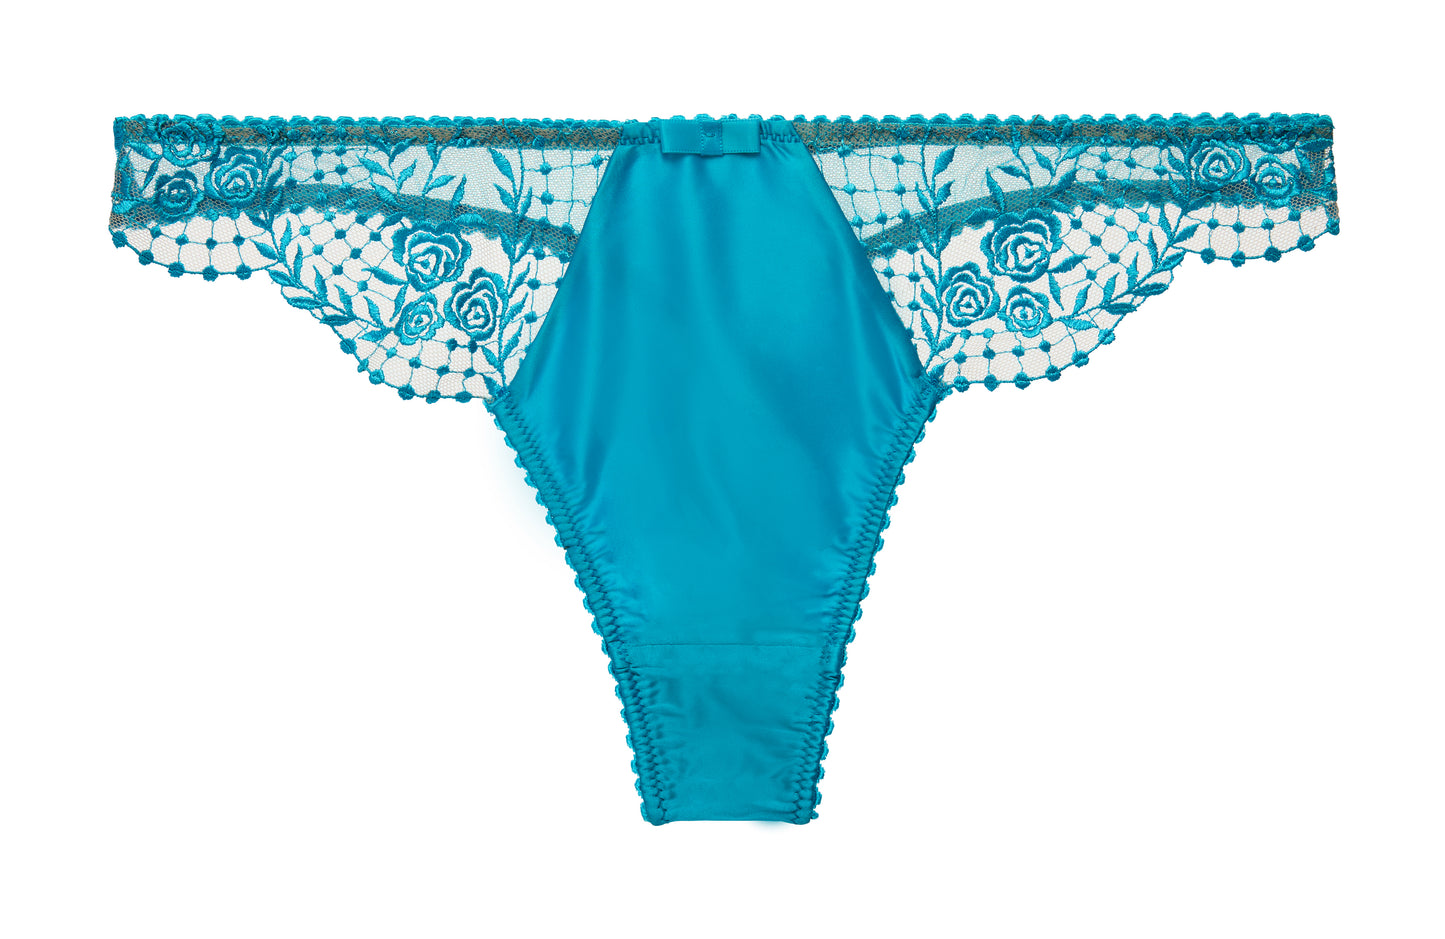 Julie's Roses Thong in Butterfly Blue By Dita Von Teese - XS